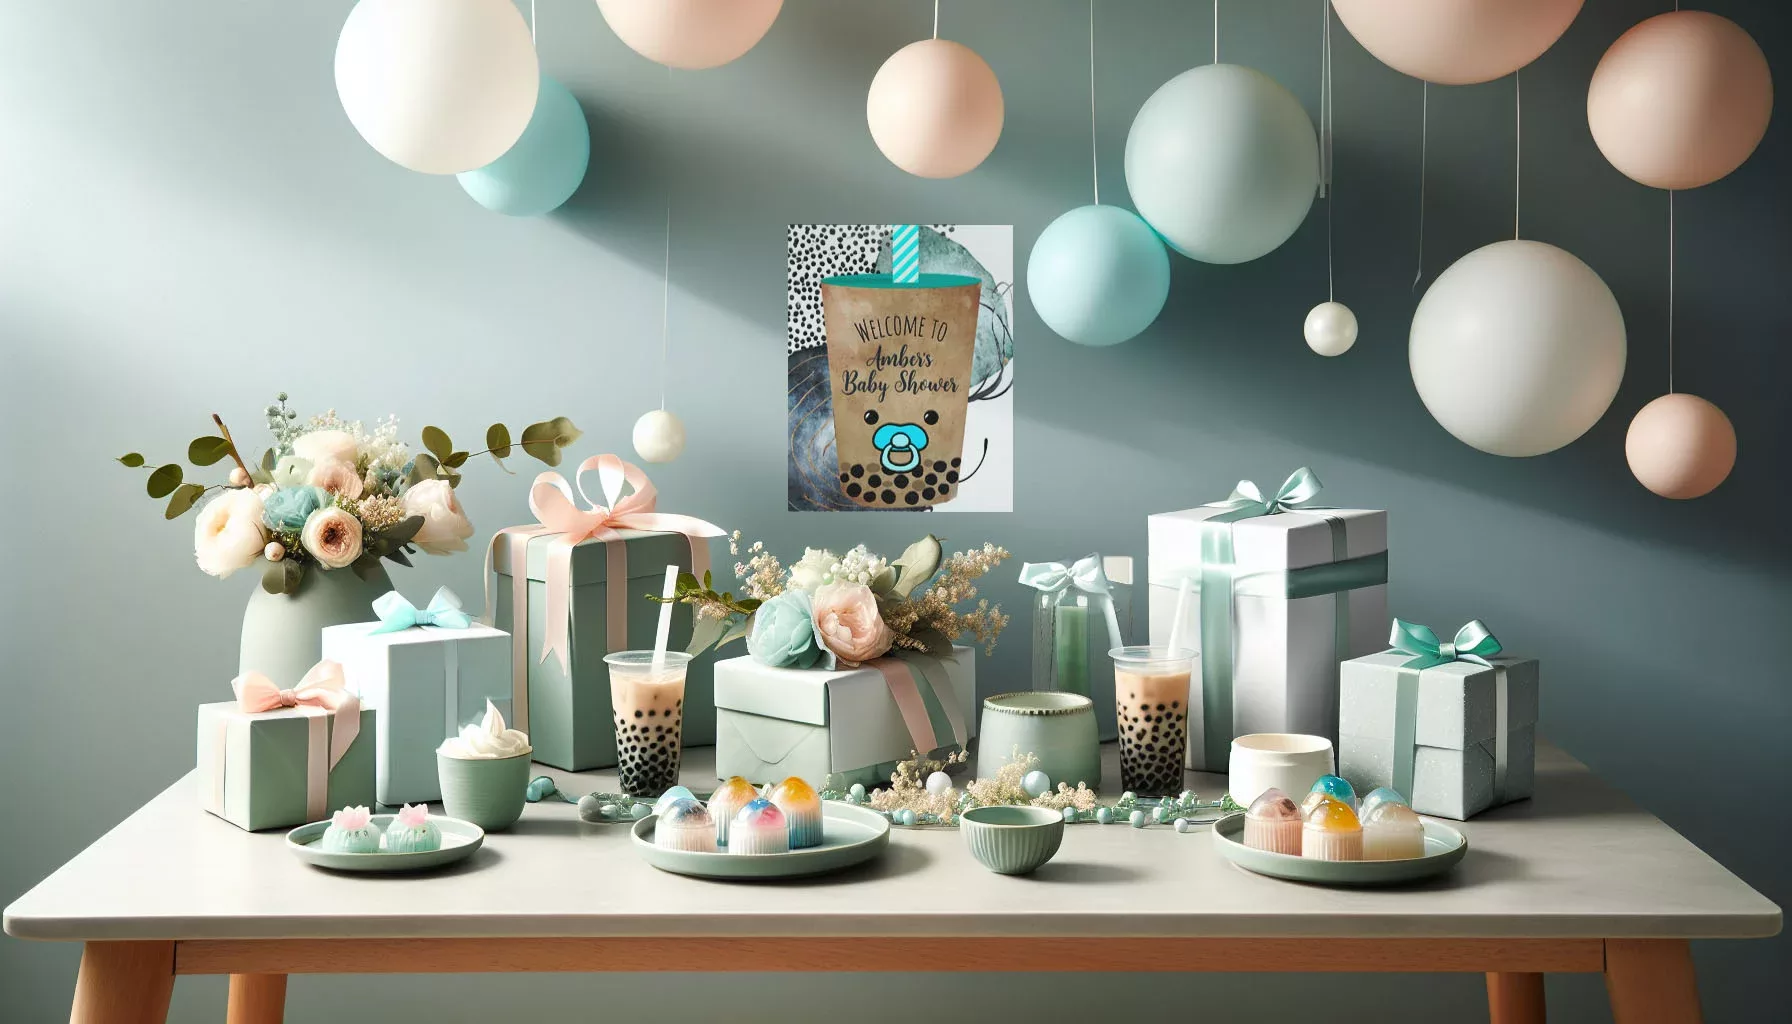 Bobas For Baby: How to Throw a Boba Tea Inspired Baby Shower that’ll Have Your Guests Sipping with Delight!